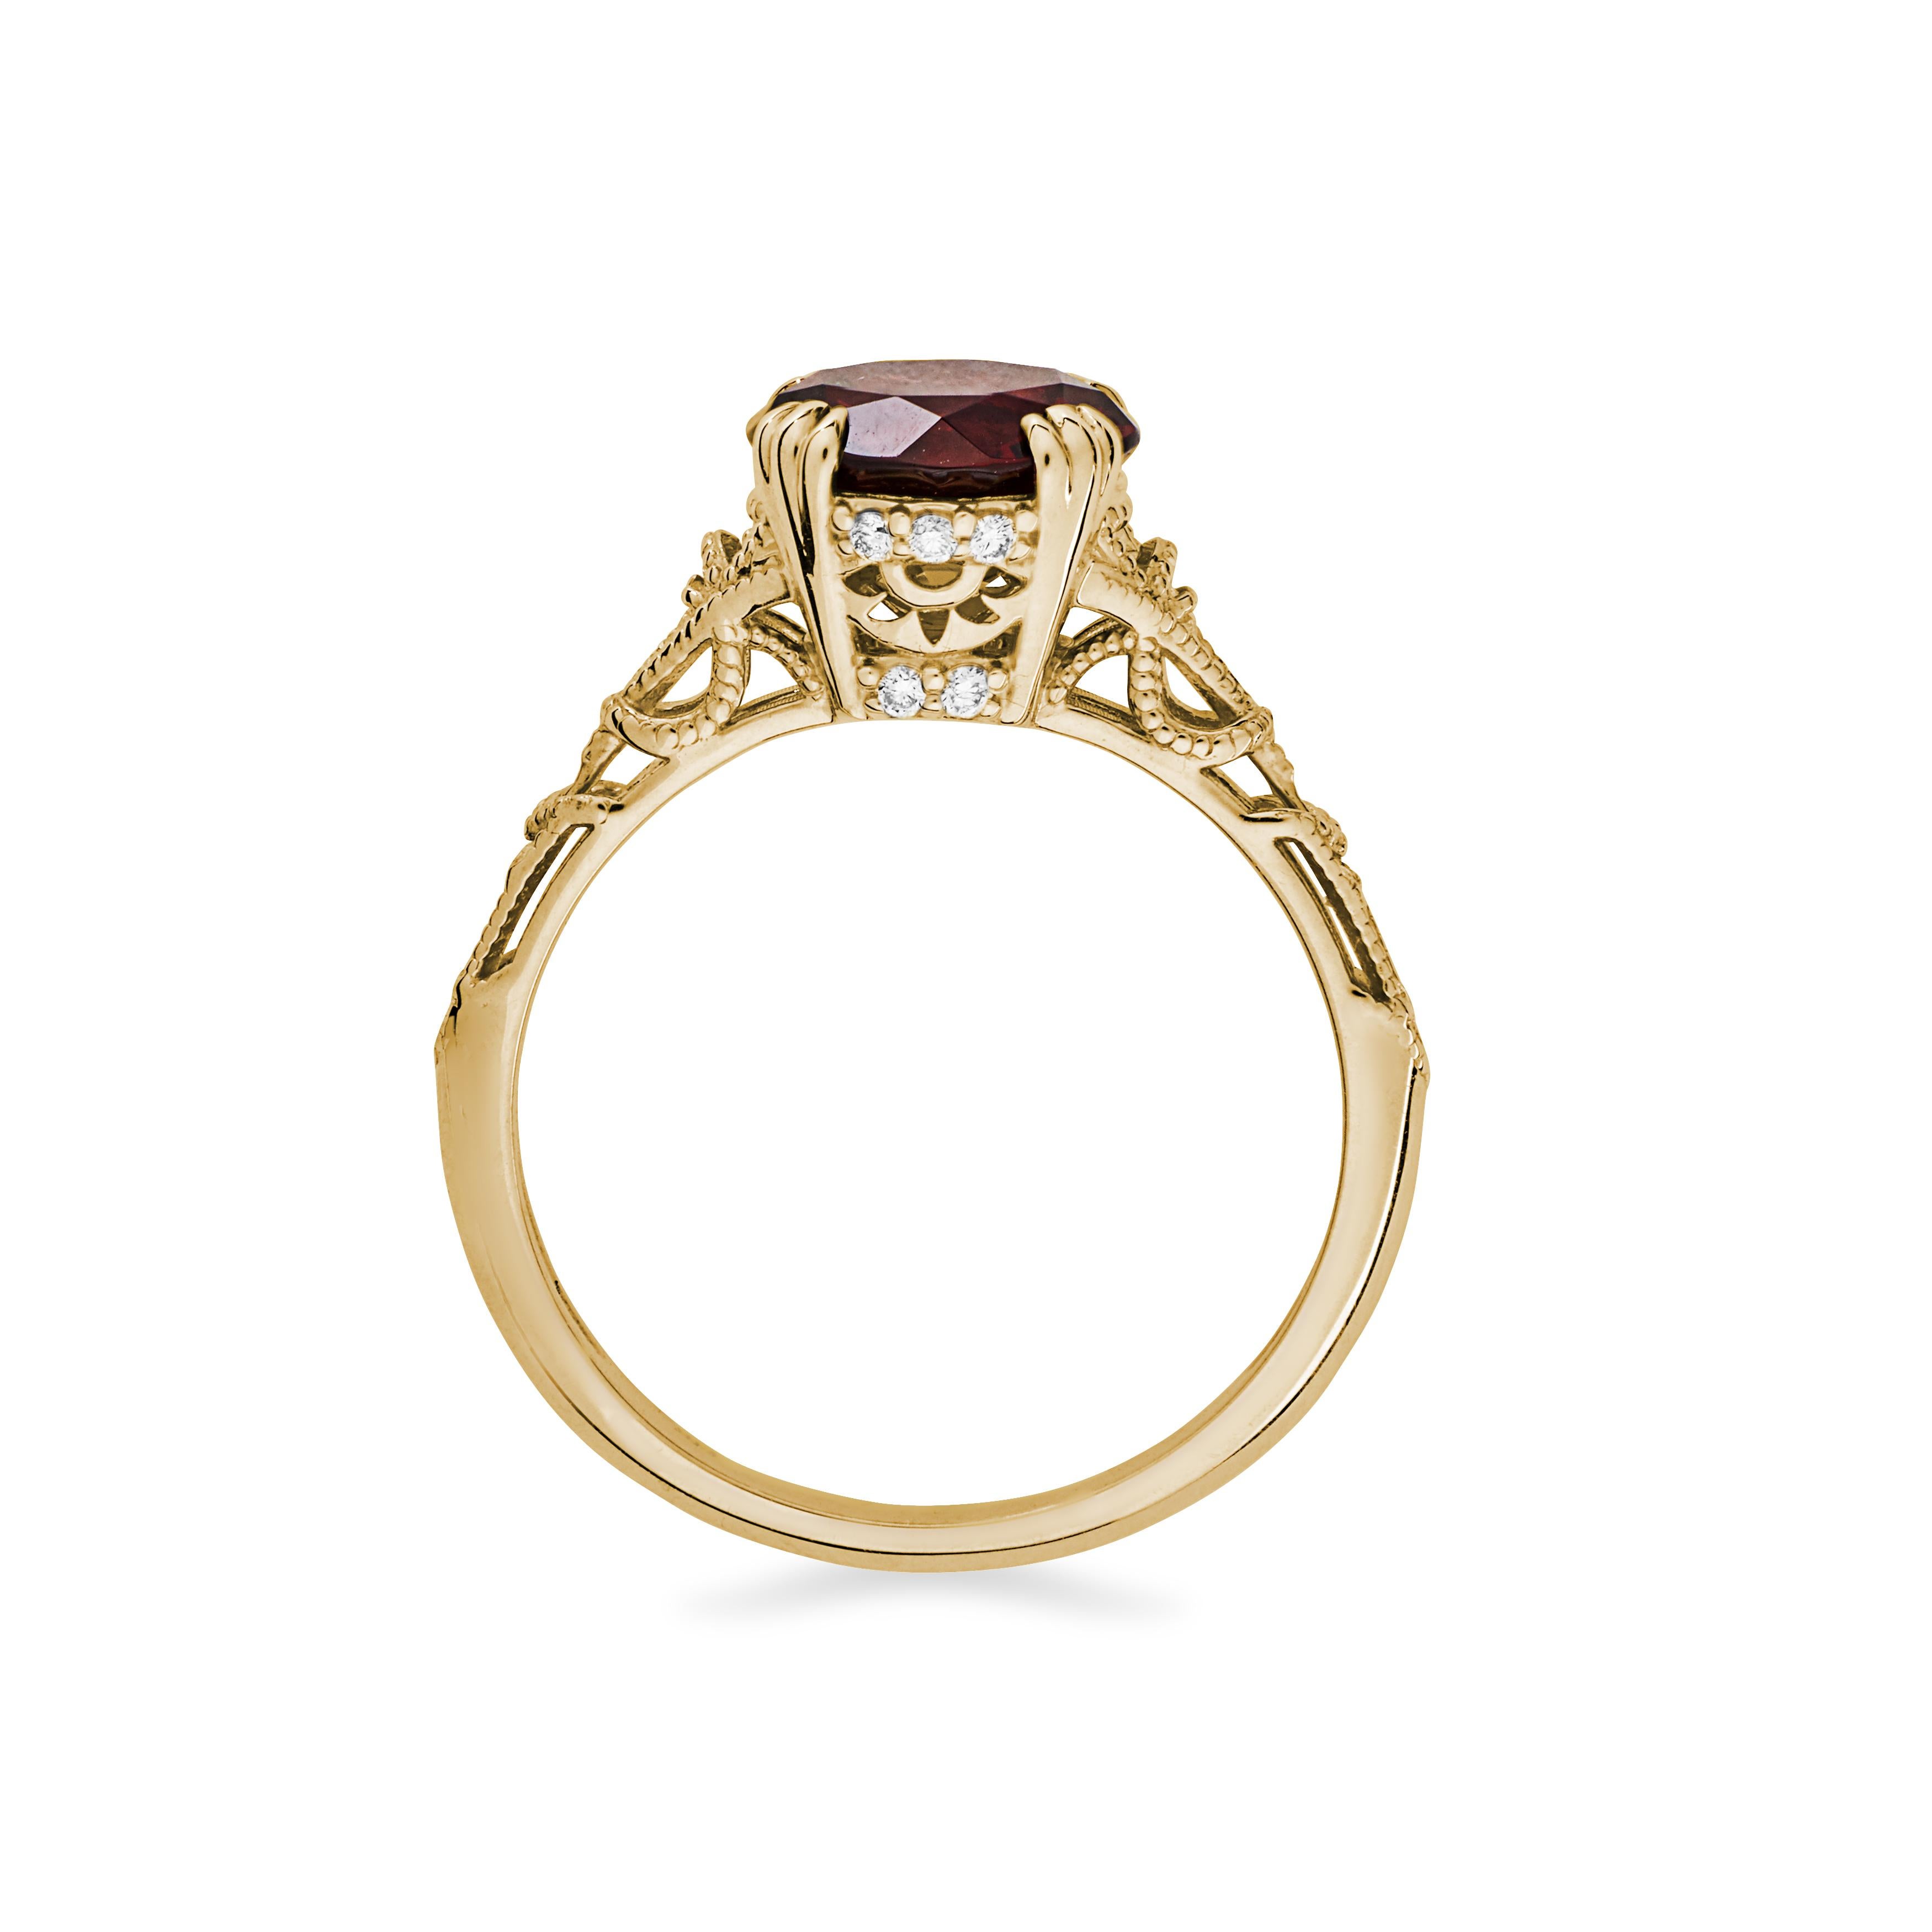 Five diamonds climb each side or this 14K gold ring, with rope and milgrain detailing in the band. Original, intriguing, and fabulous.

Materials + Dimensions: 14k yellow gold, 8.2mm garnet center stone, .08ctw VS G/H round diamond melee
